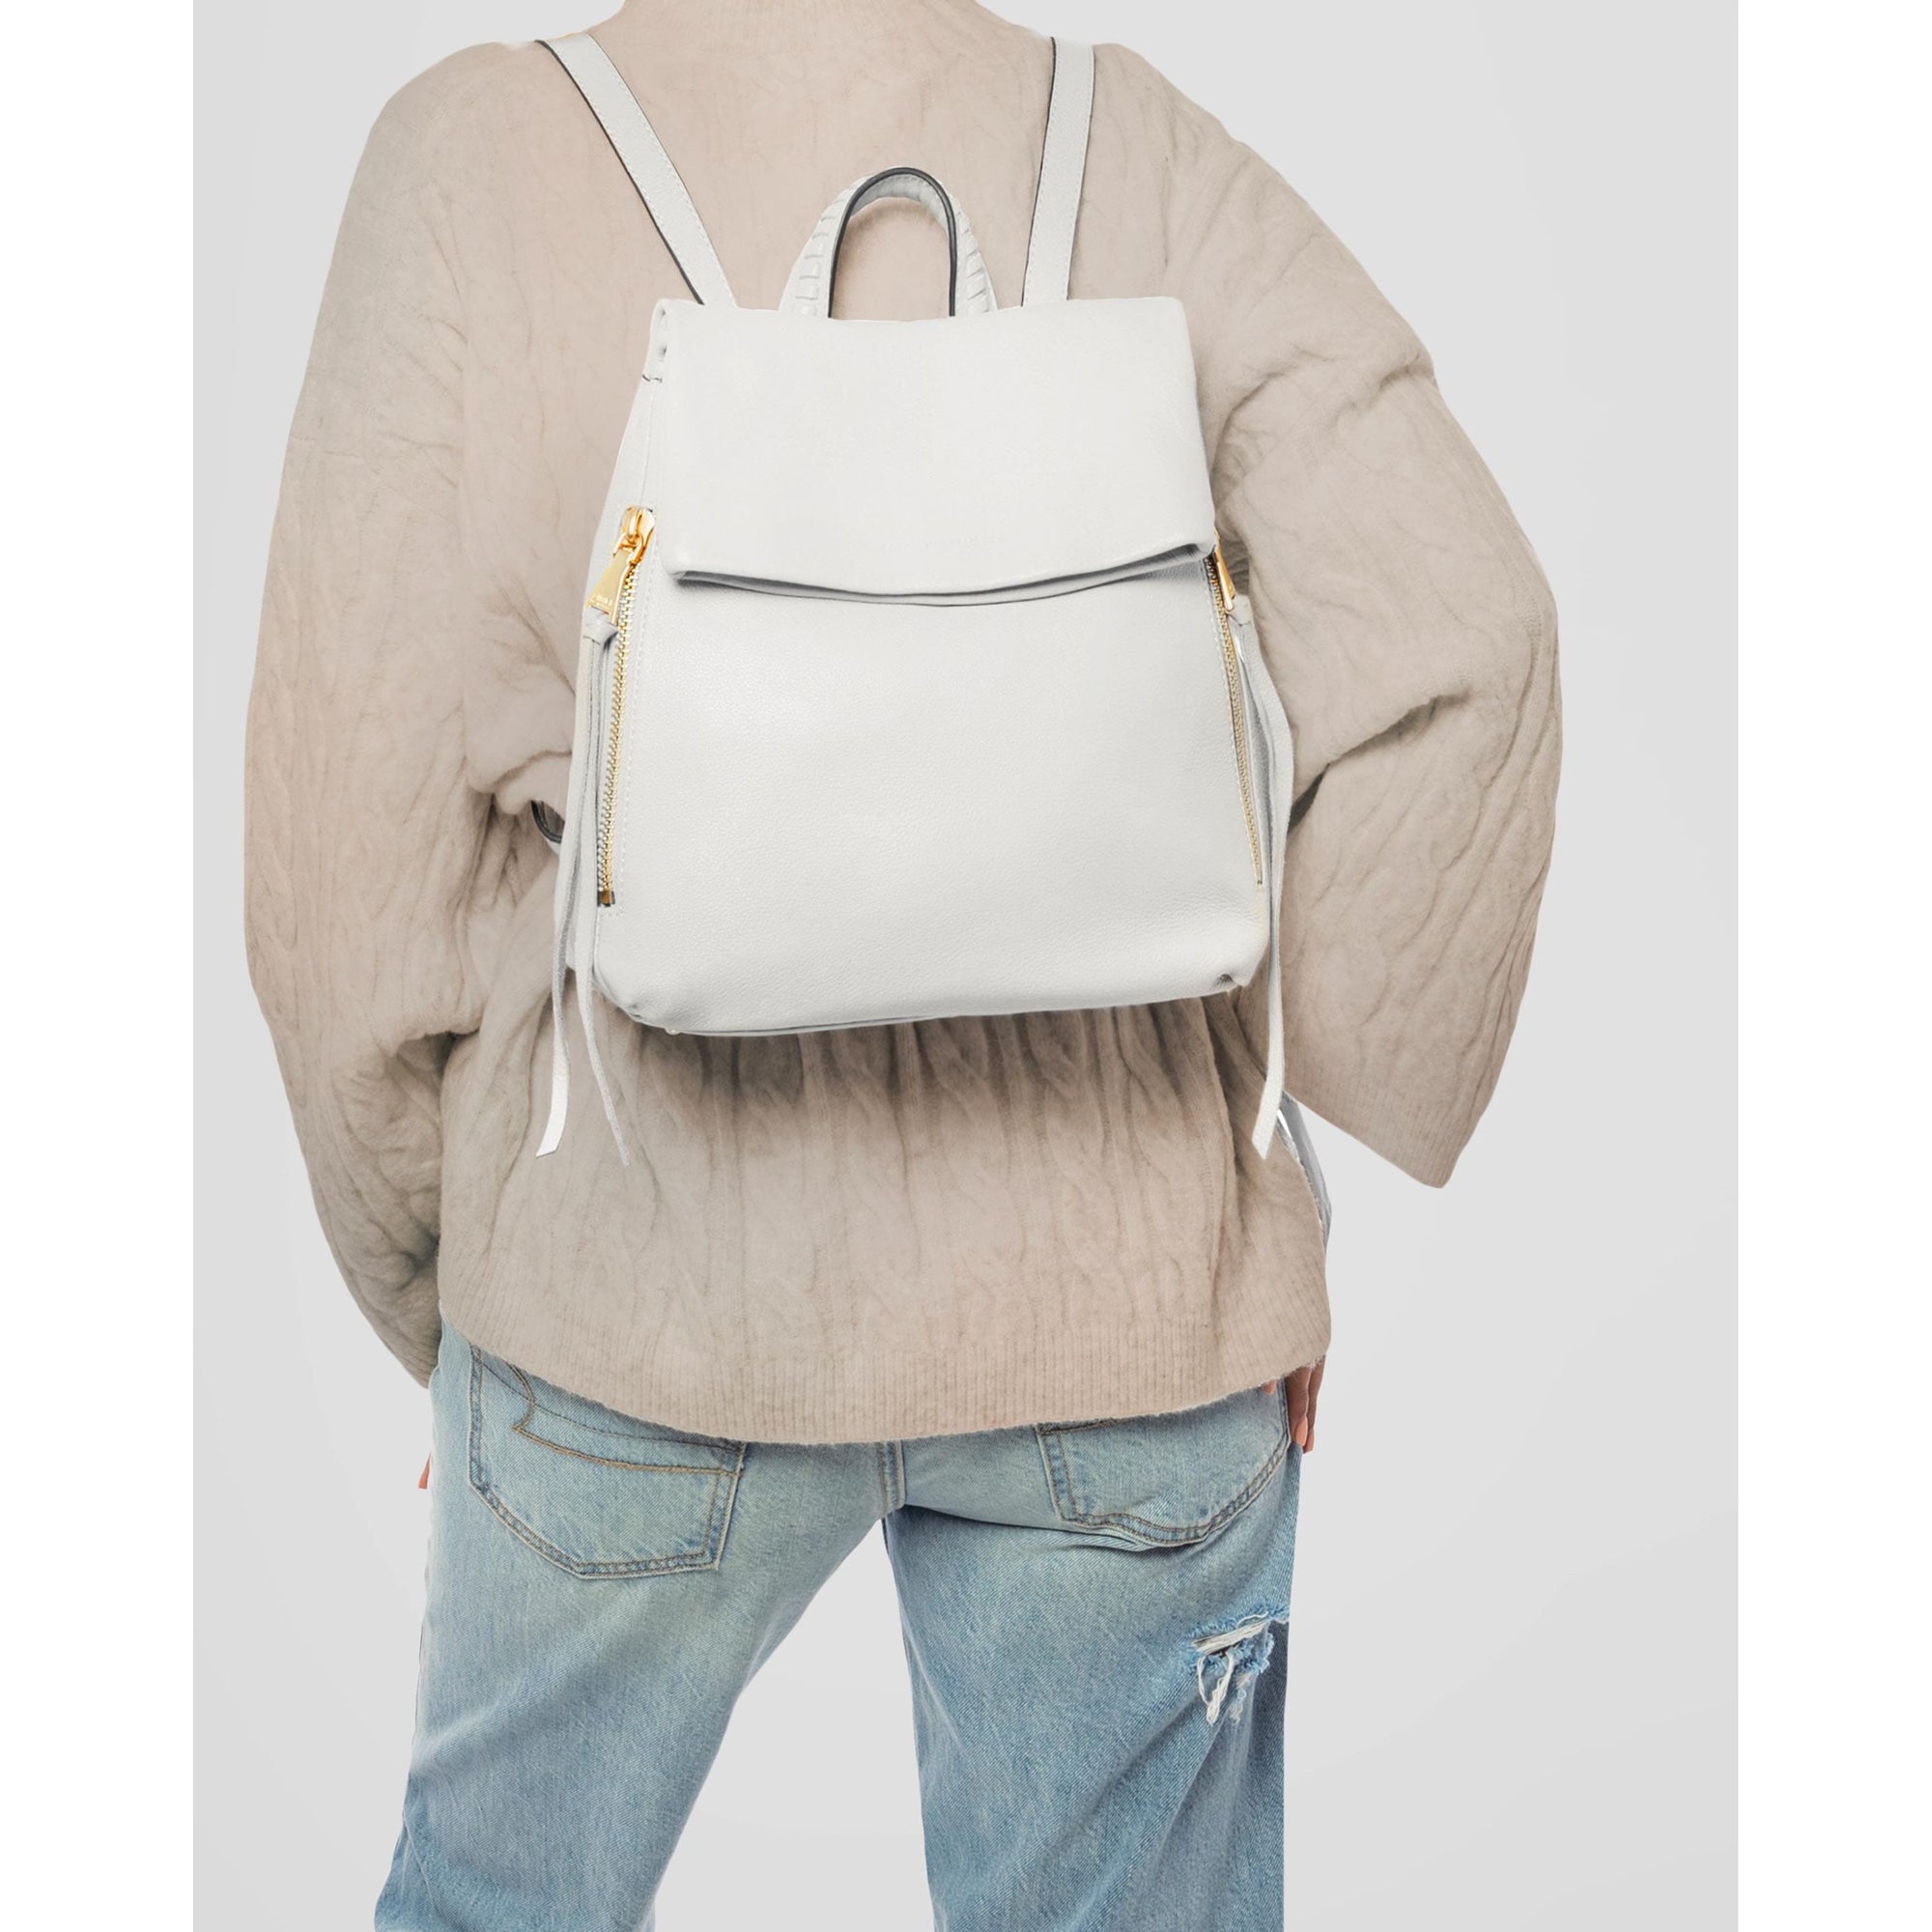 Aimee Kestenberg Cloud with Shiny Gold / Backpacks Bali Backpack by Aimee Kestenberg